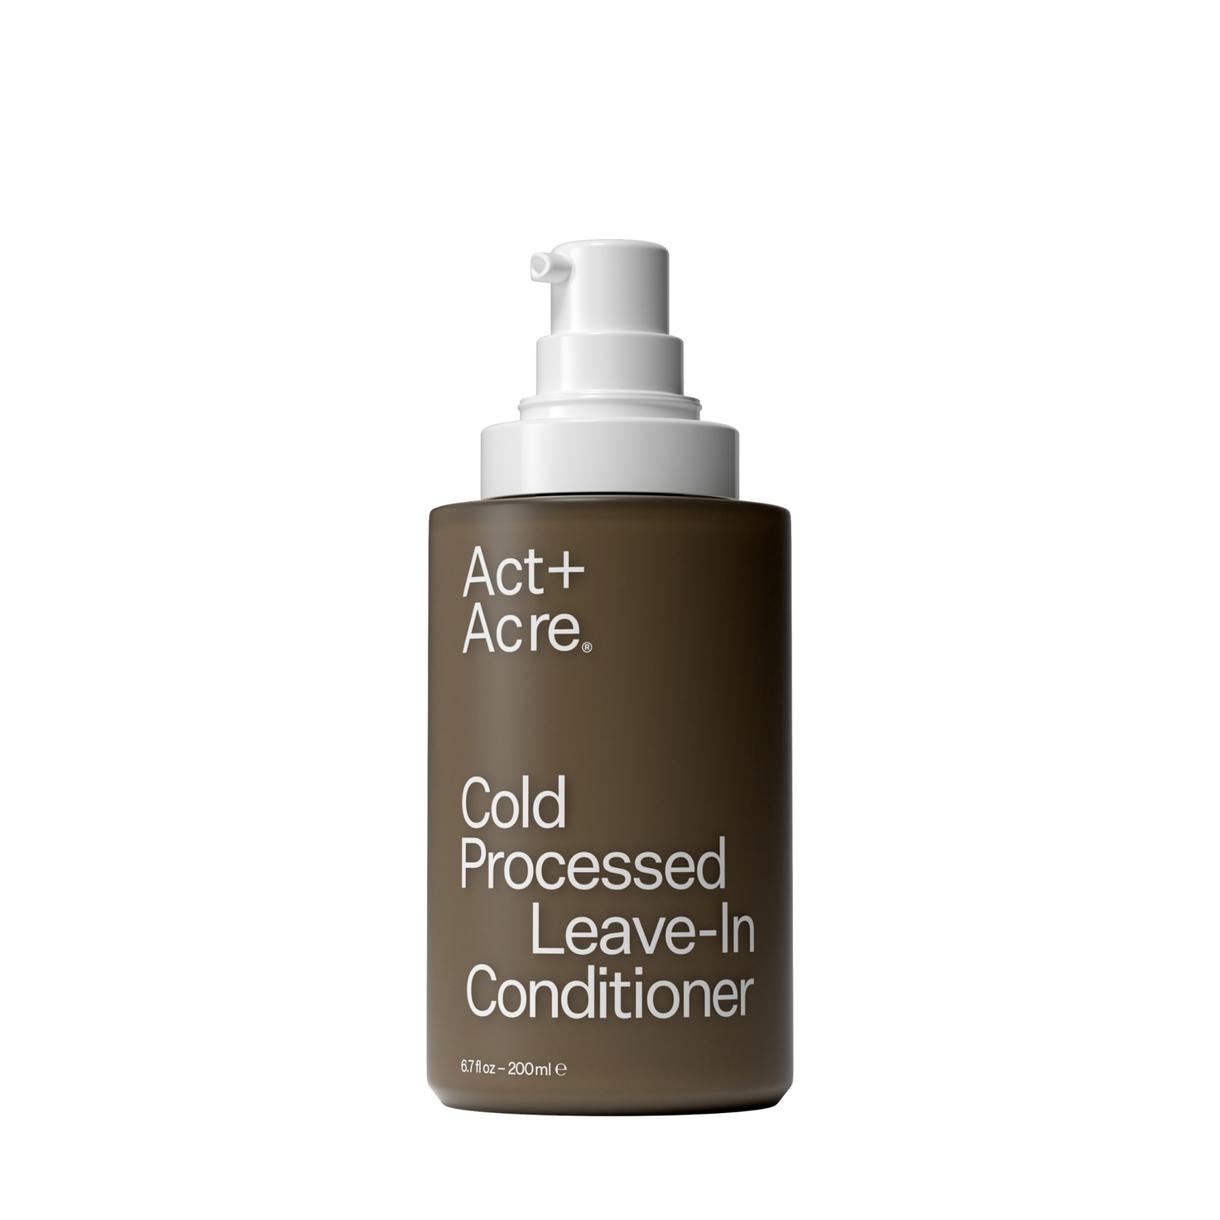 Act + Acre Cold Processed Leave-in Conditioner